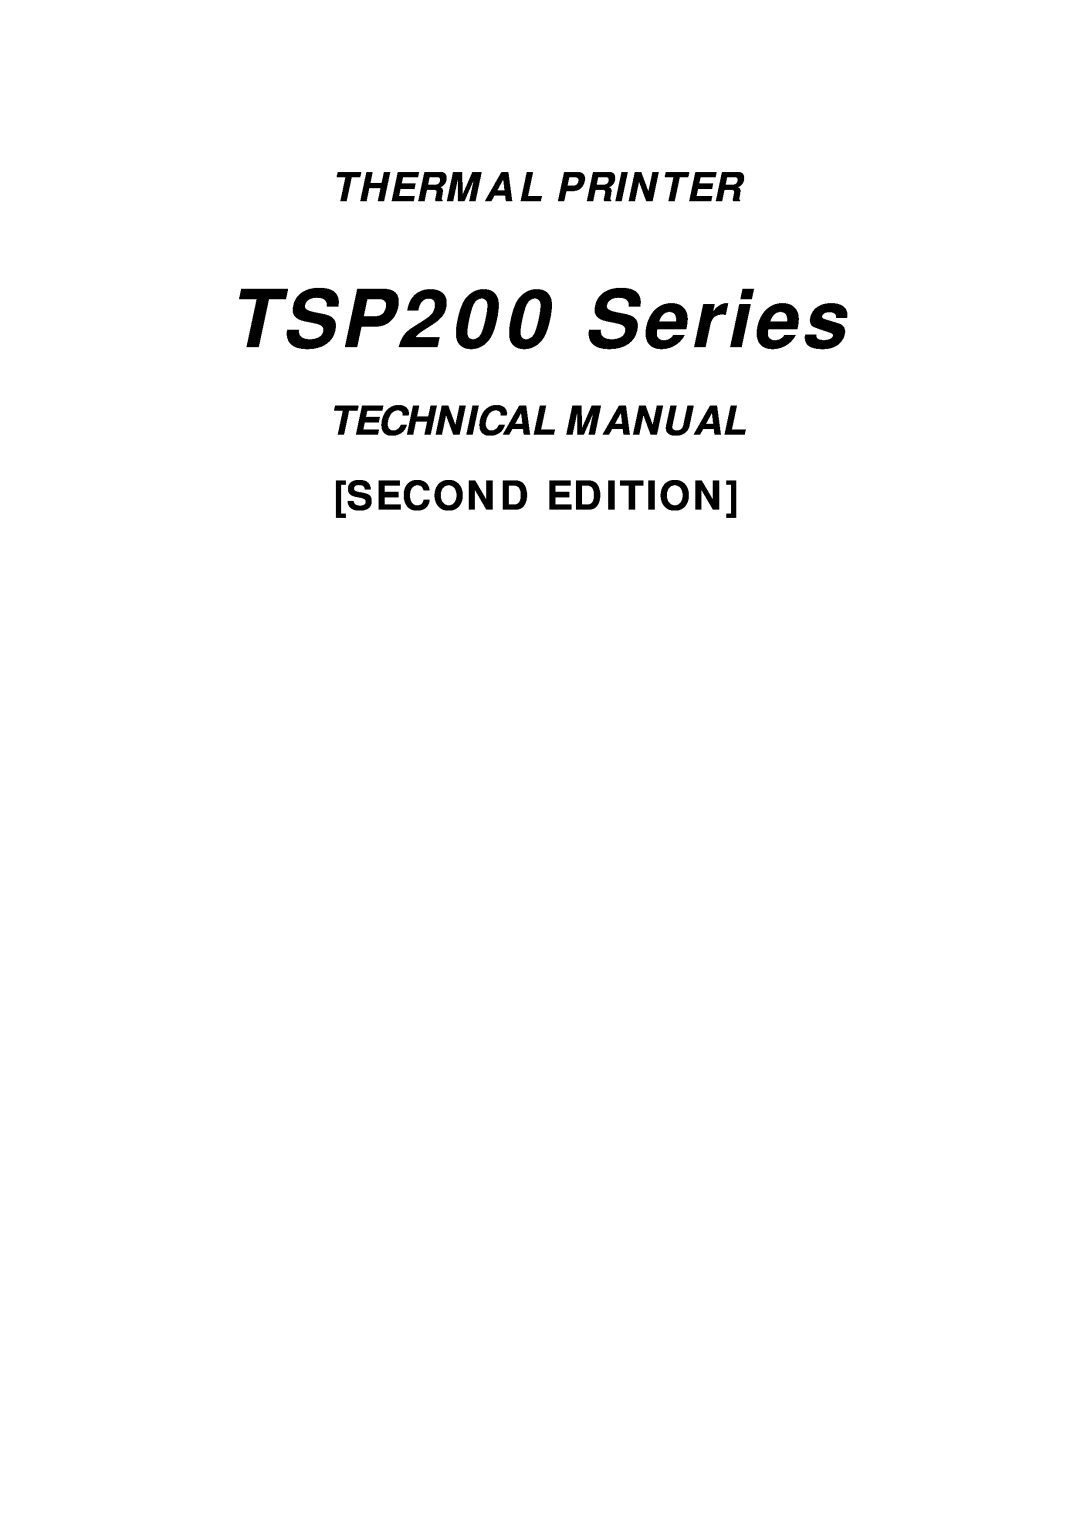 Star Micronics technical manual TSP200 Series, Thermal Printer, Technical Manual, Second Edition 